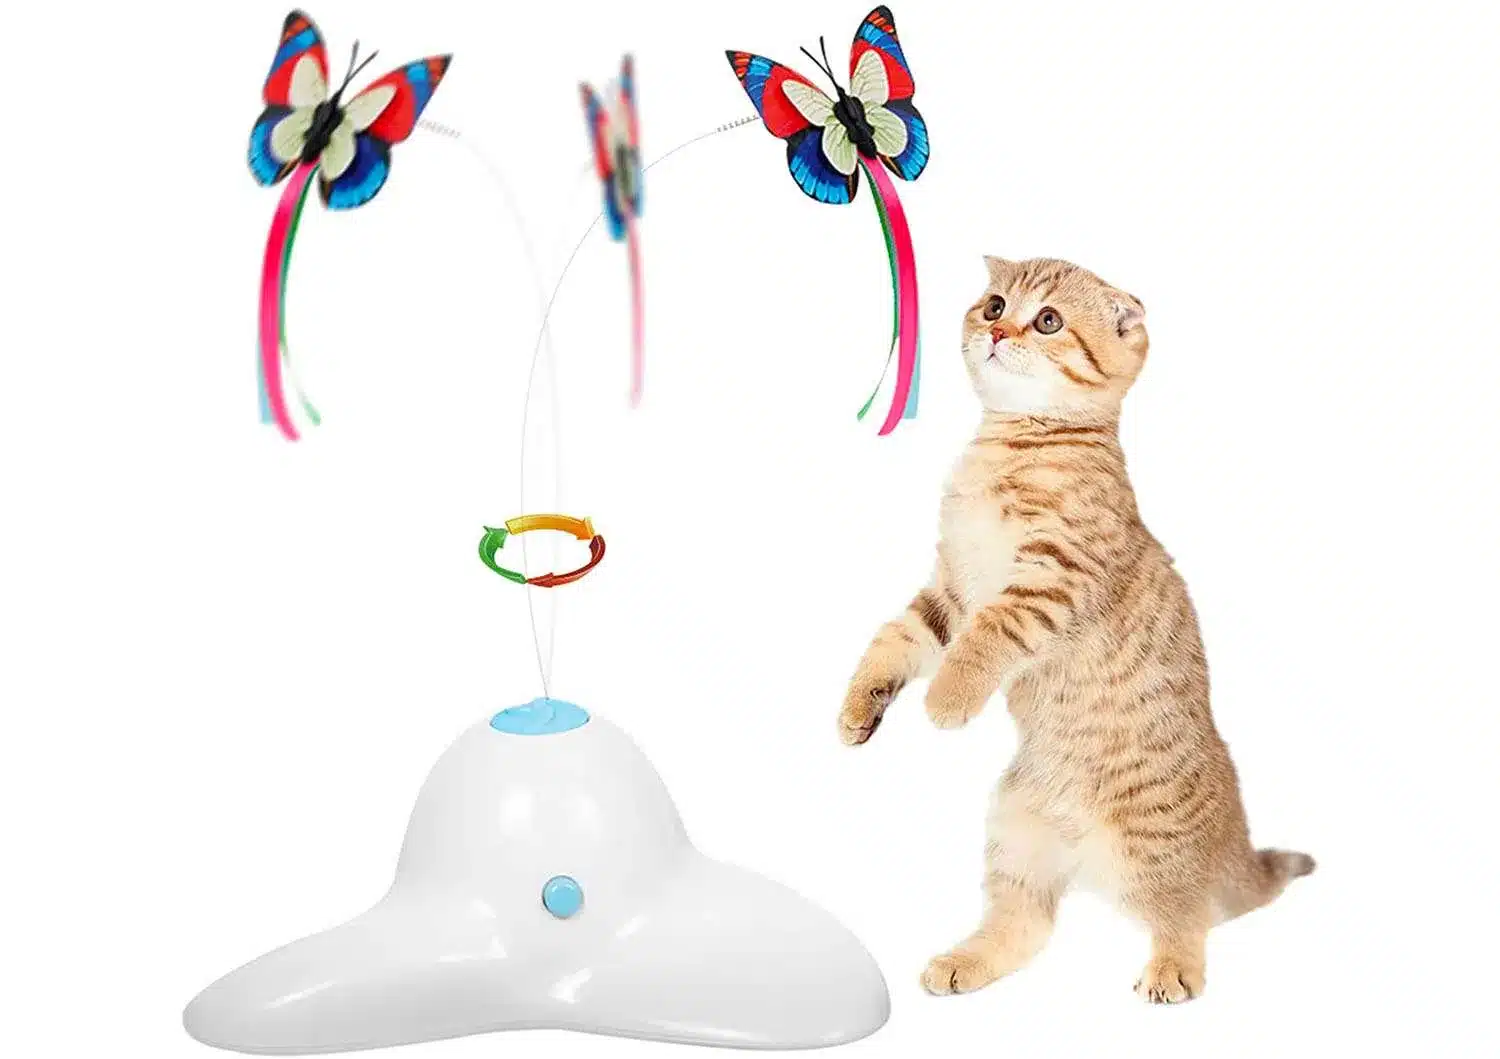 Cat Feather Toys Interactive Cats - Dorakitten Cat Powerful Suction Cup  Handheld Teaser Wand Toy and 5PCS Replacement Feather with Bell for Kitty